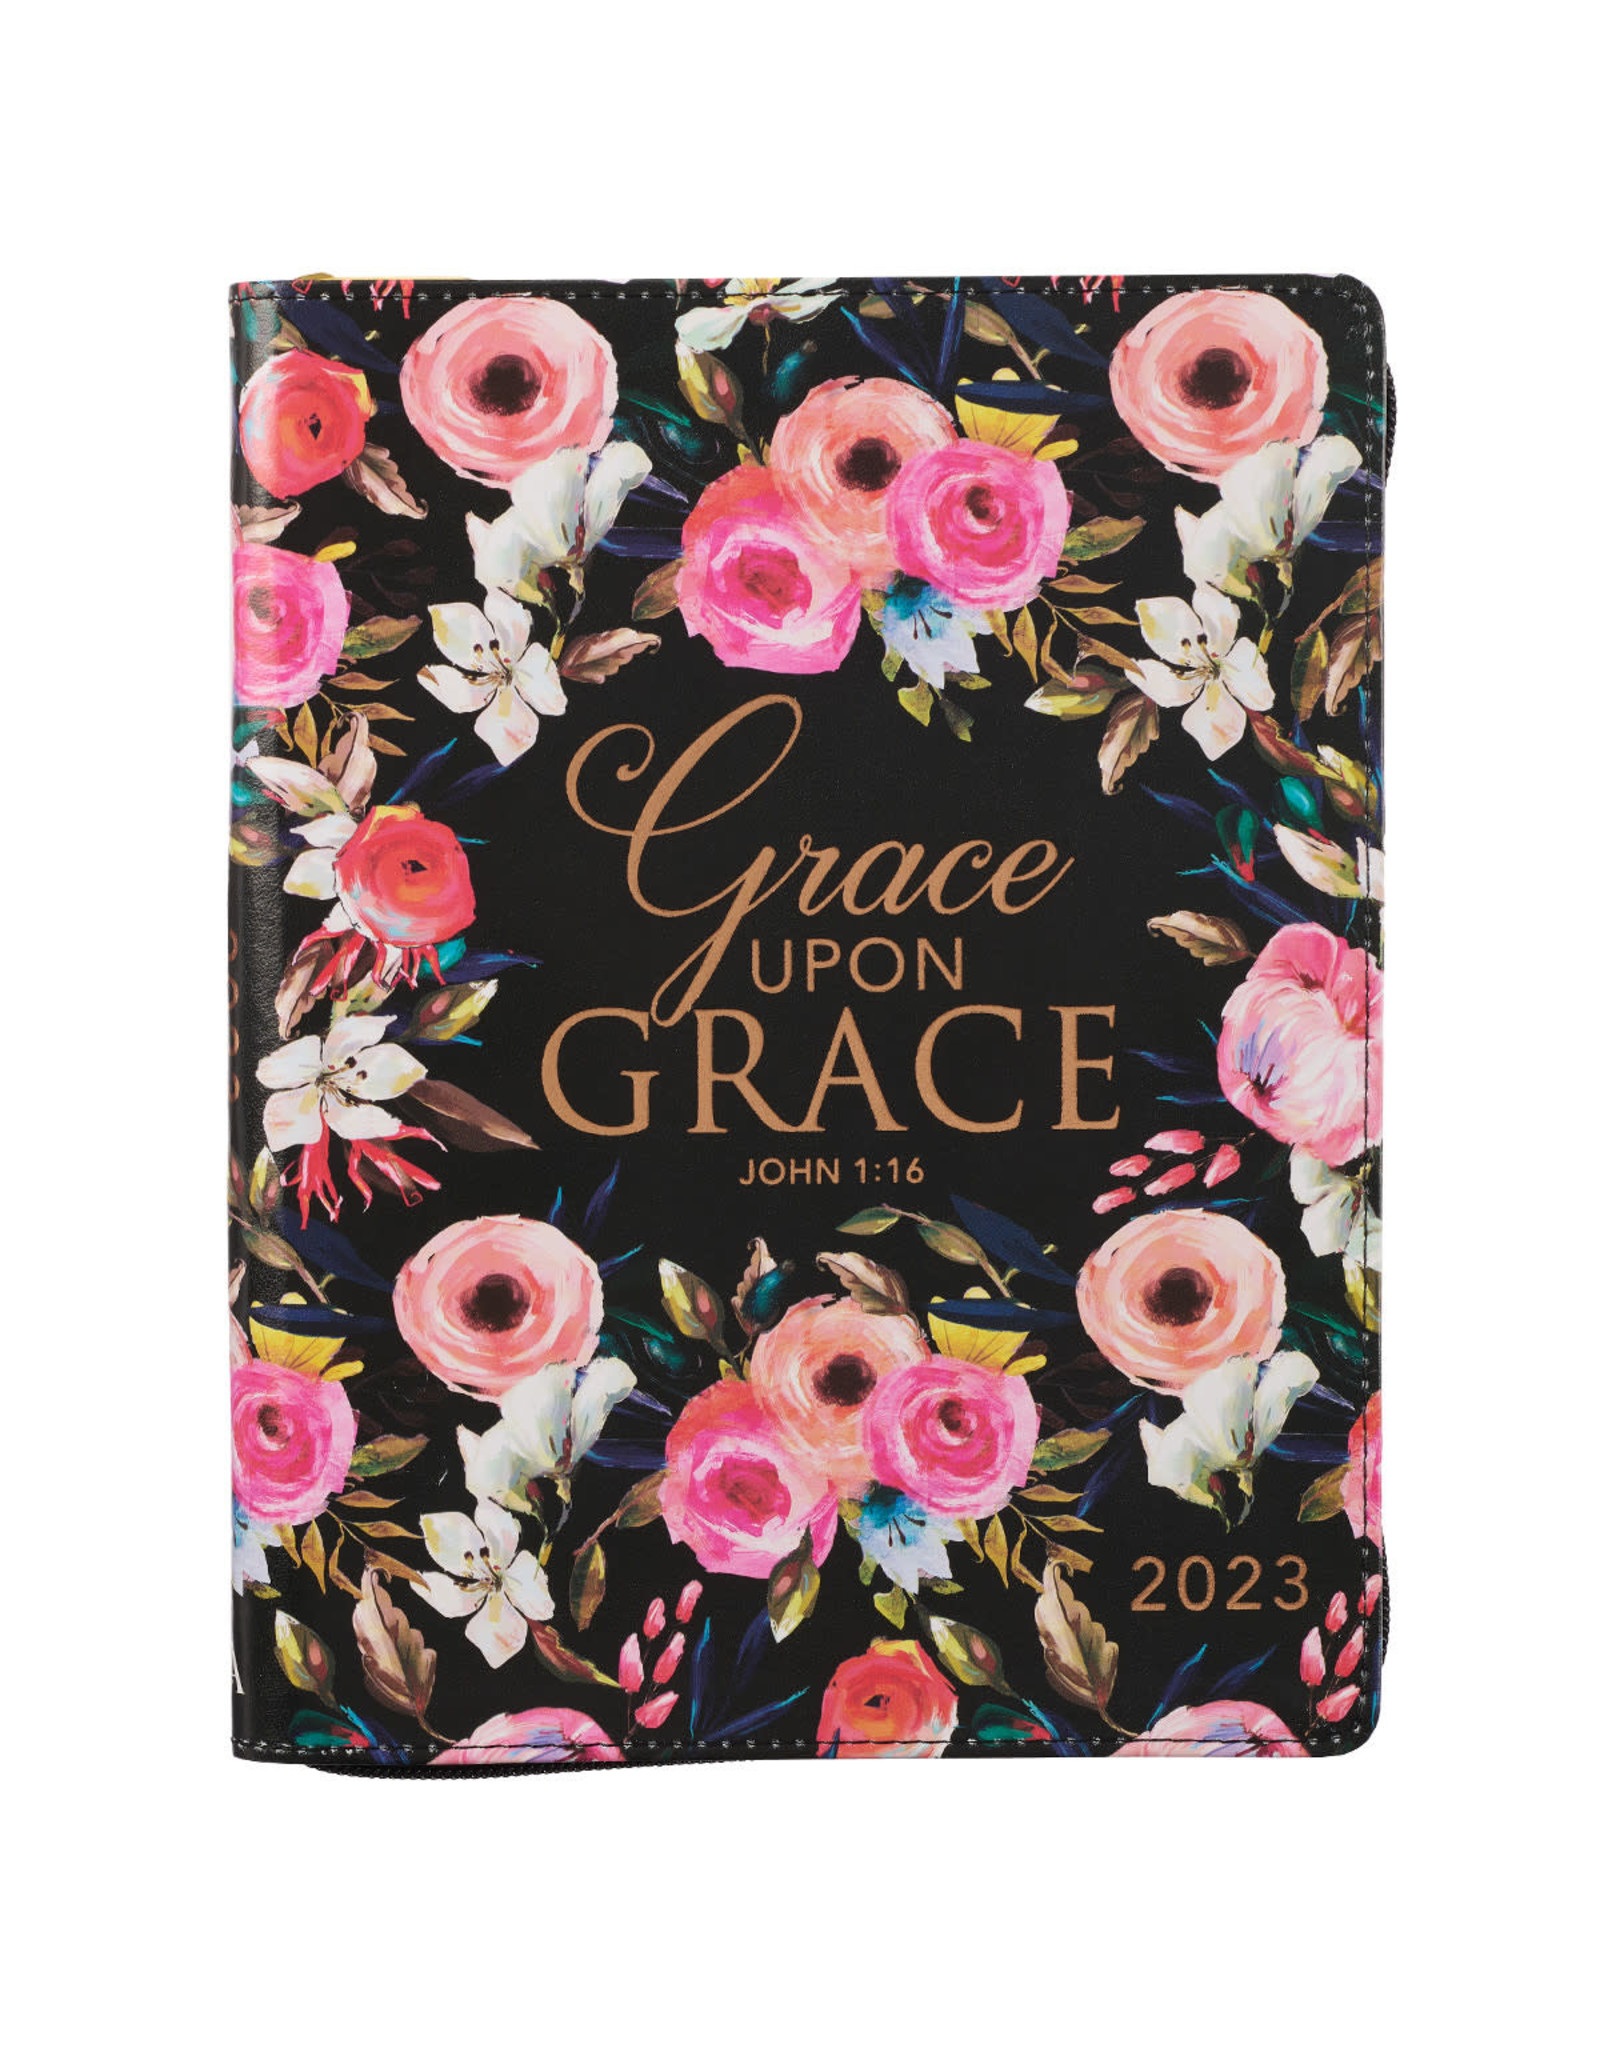 Christian Art Gifts 2023 Planner - Grace Upon Grace, Black with Peonies (John 1:16)